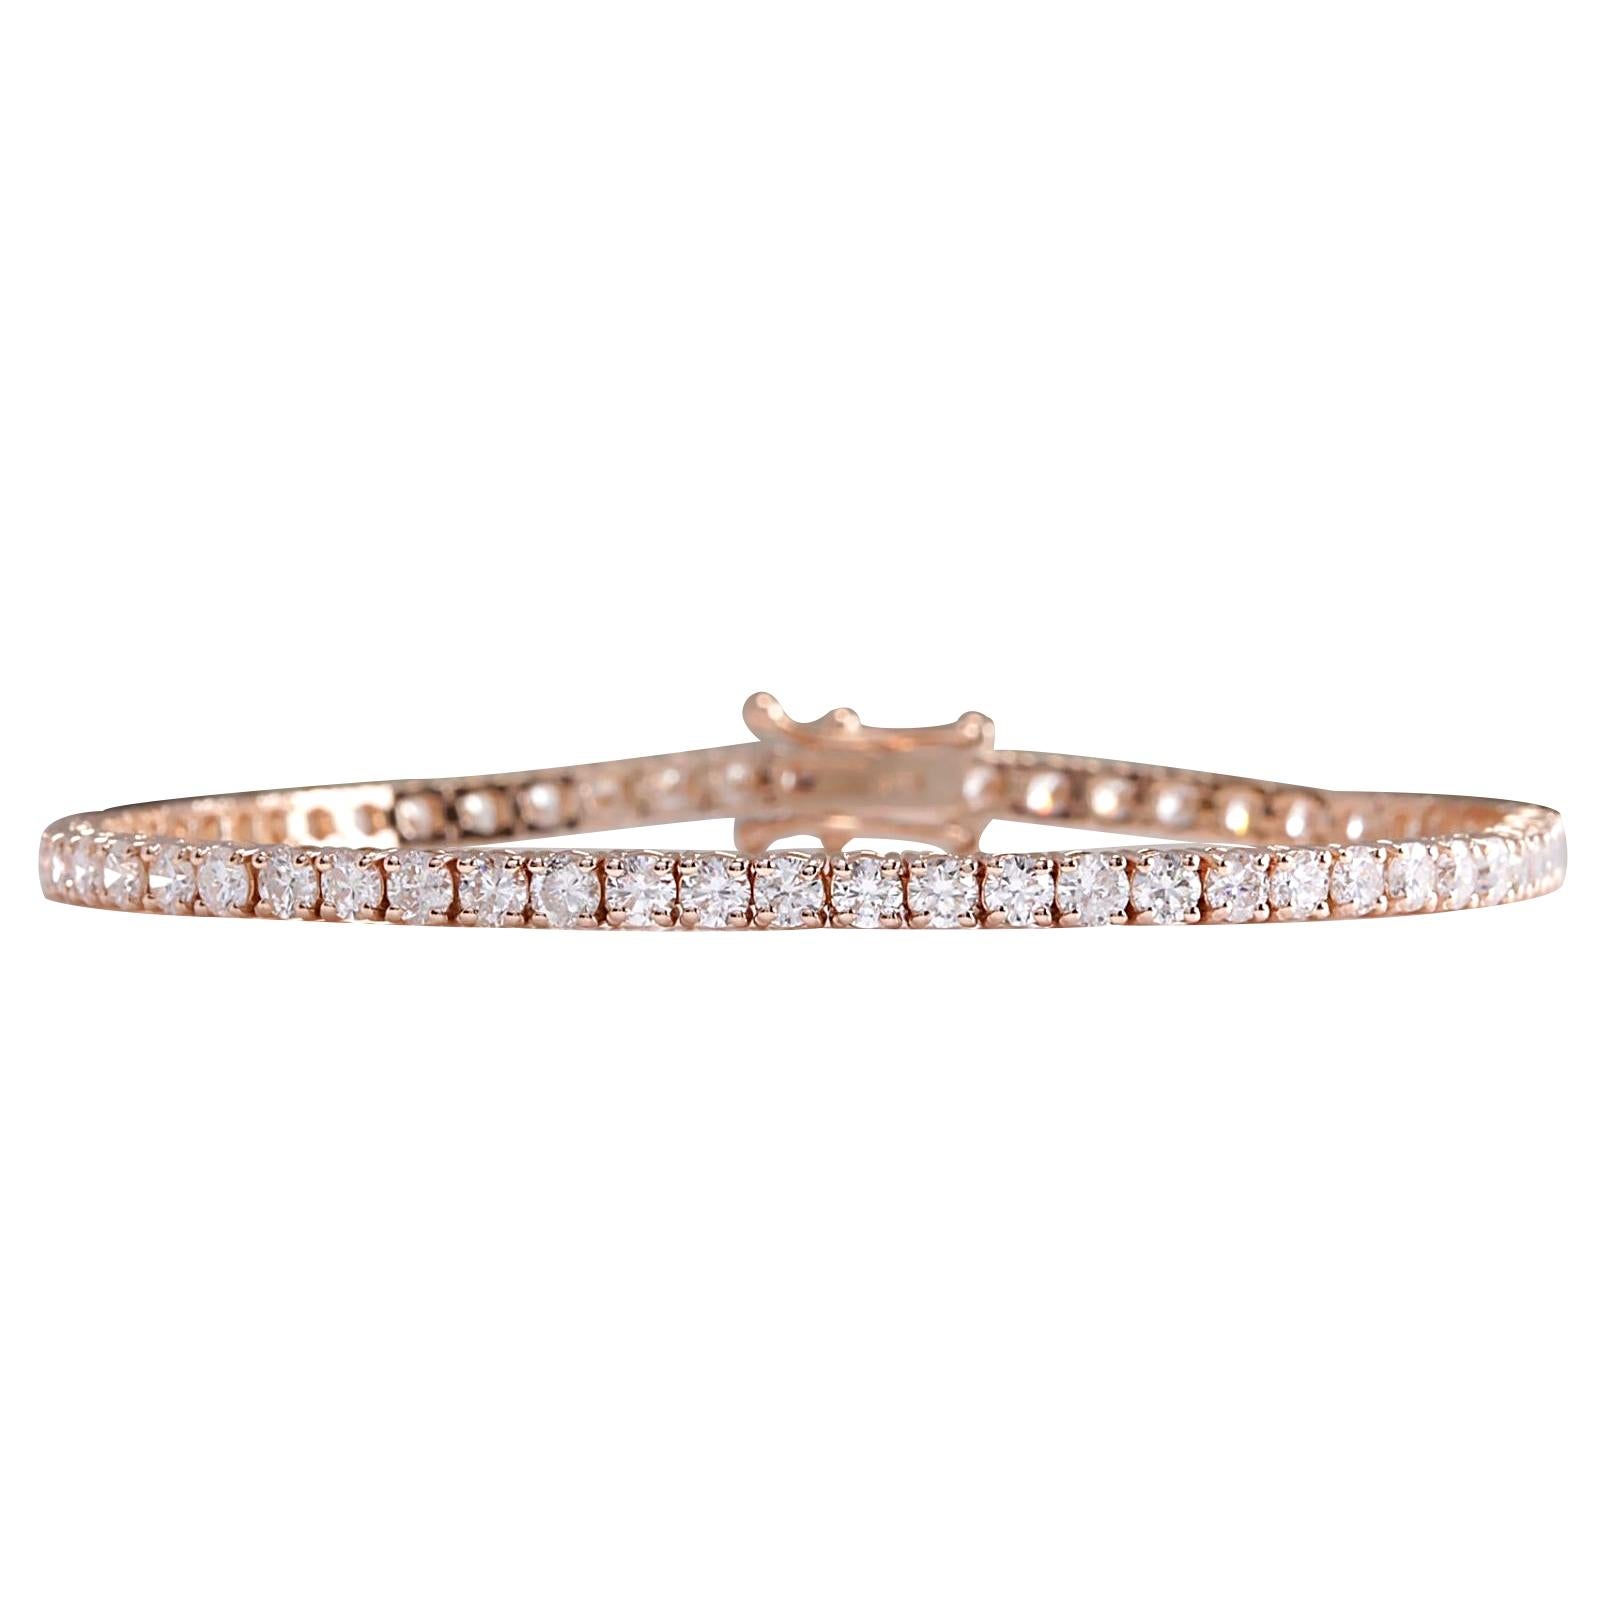 5.01 Carat Natural Diamond Tennis Bracelet In 14 Karat Rose Gold  In New Condition For Sale In Los Angeles, CA